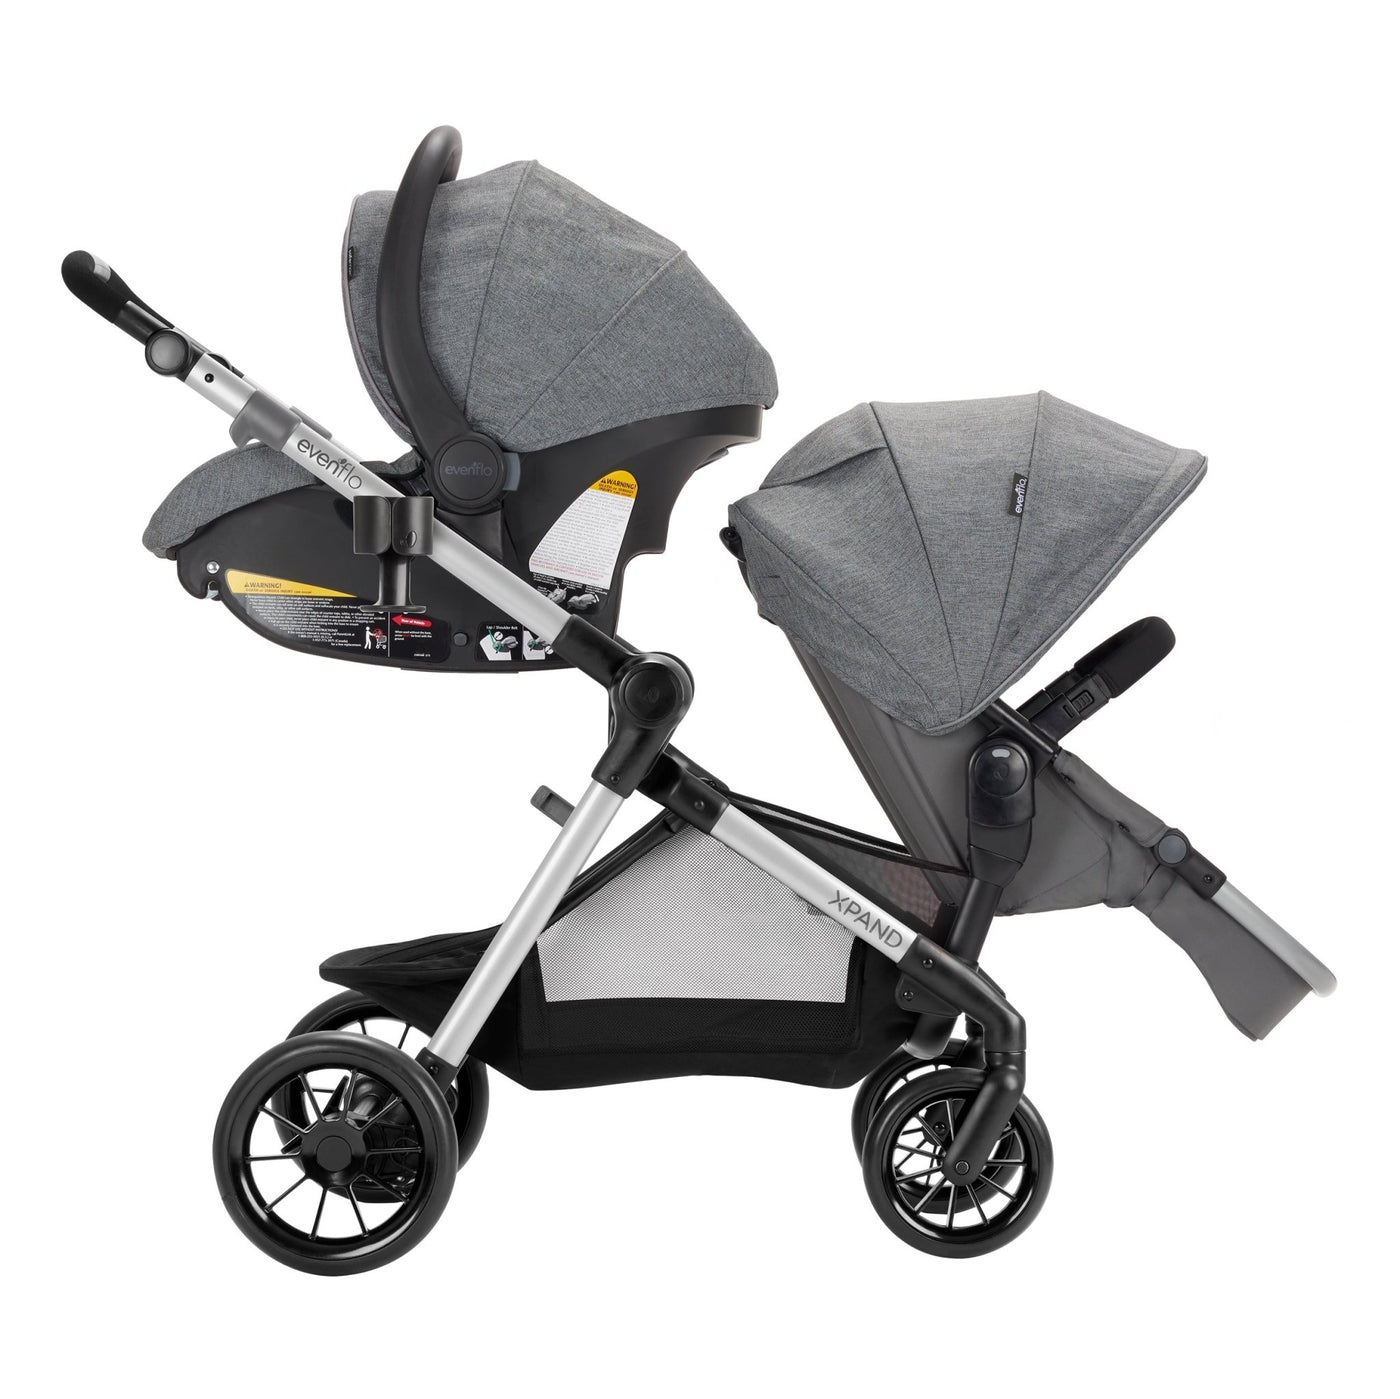 Pivot Xpand Modular Travel System with SafeMax Infant Car Seat